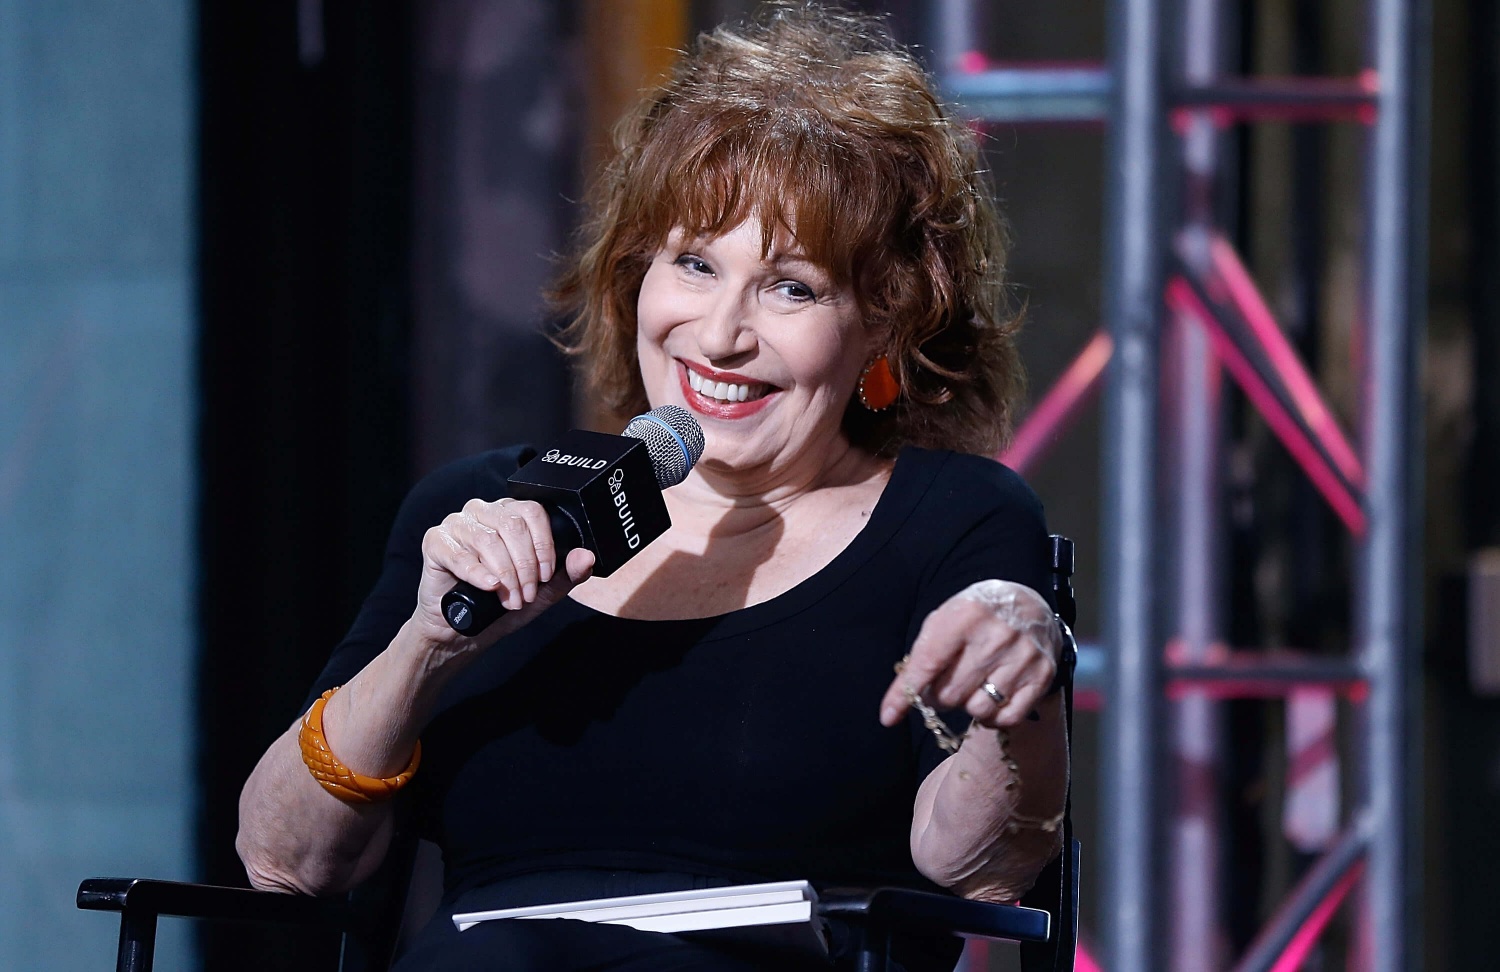 Joy Behar discusses Ali Wentworth's new book "Happily Ali After" during AOL BUILD Speaker Series at AOL Studios In New York on June 9, 2015 in New York City. (Photo by John Lamparski/WireImage)